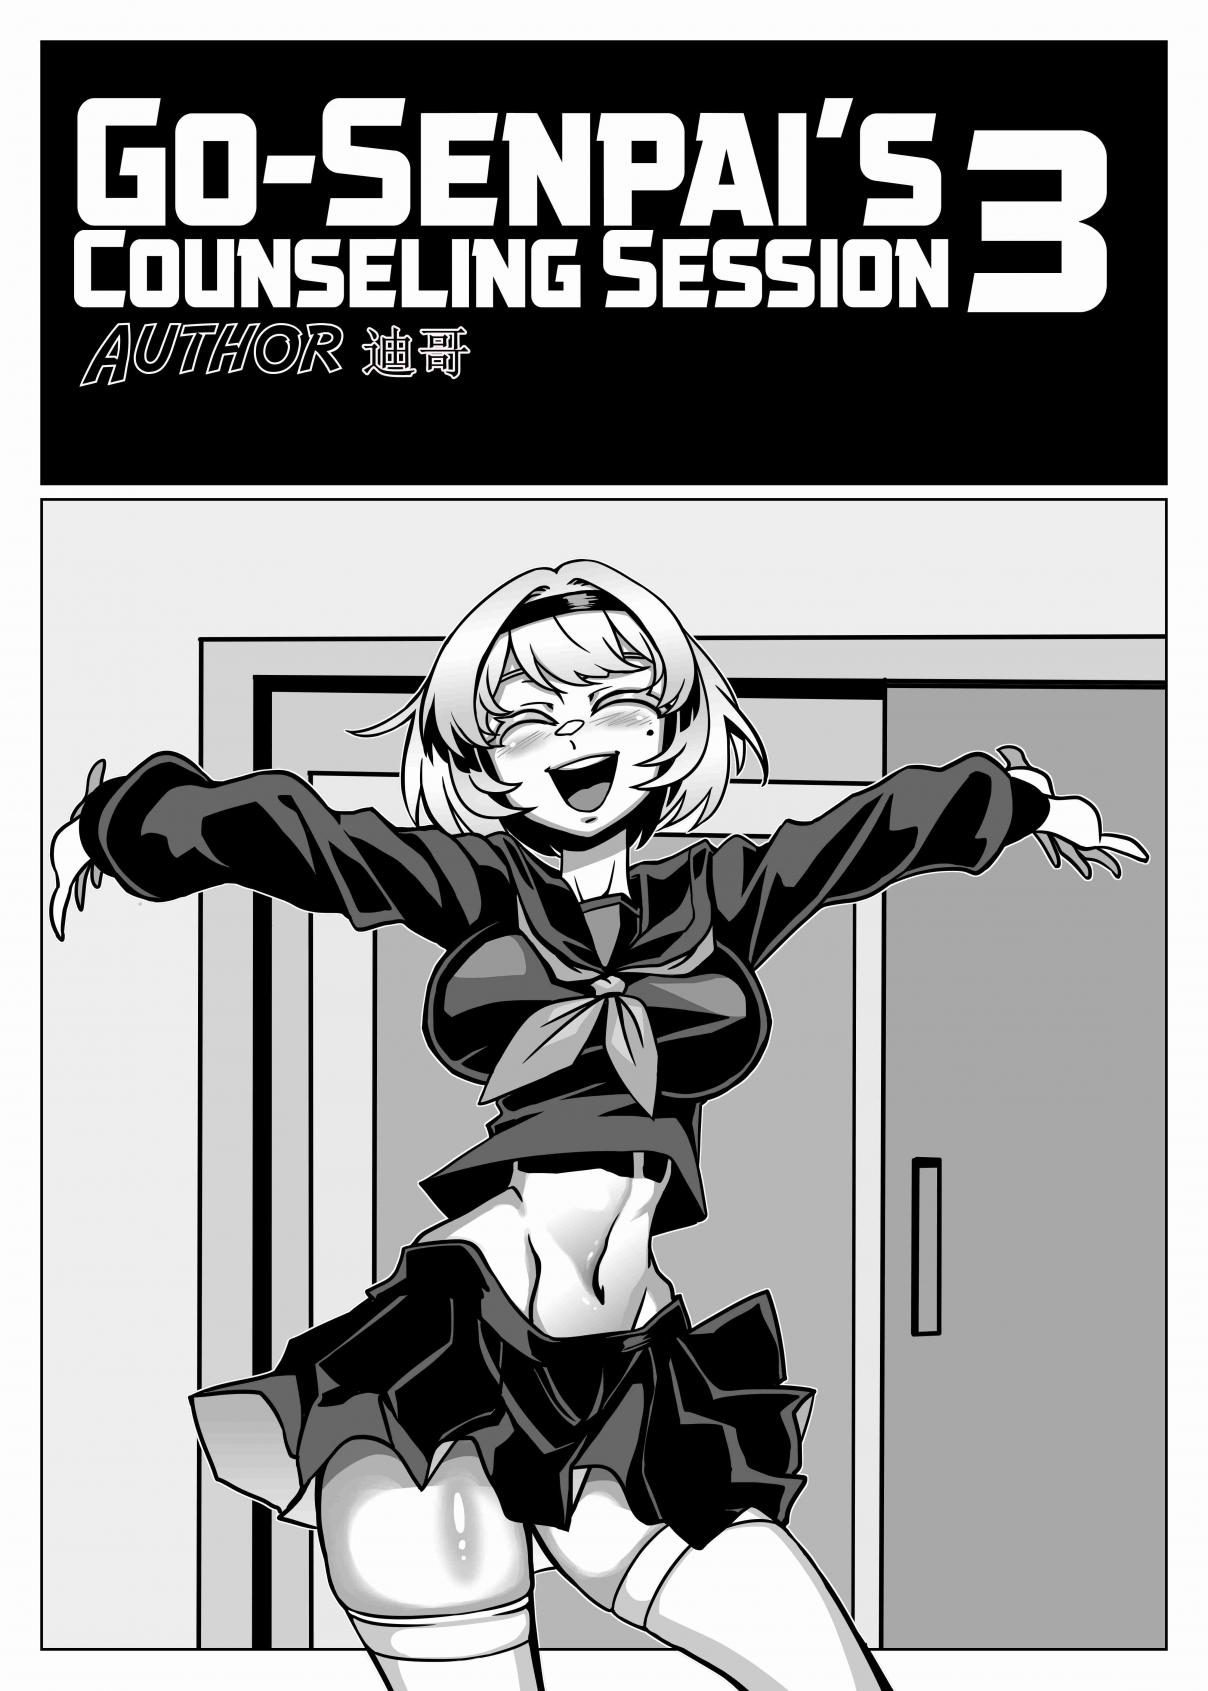 Go-senpai's Counselling Session 3